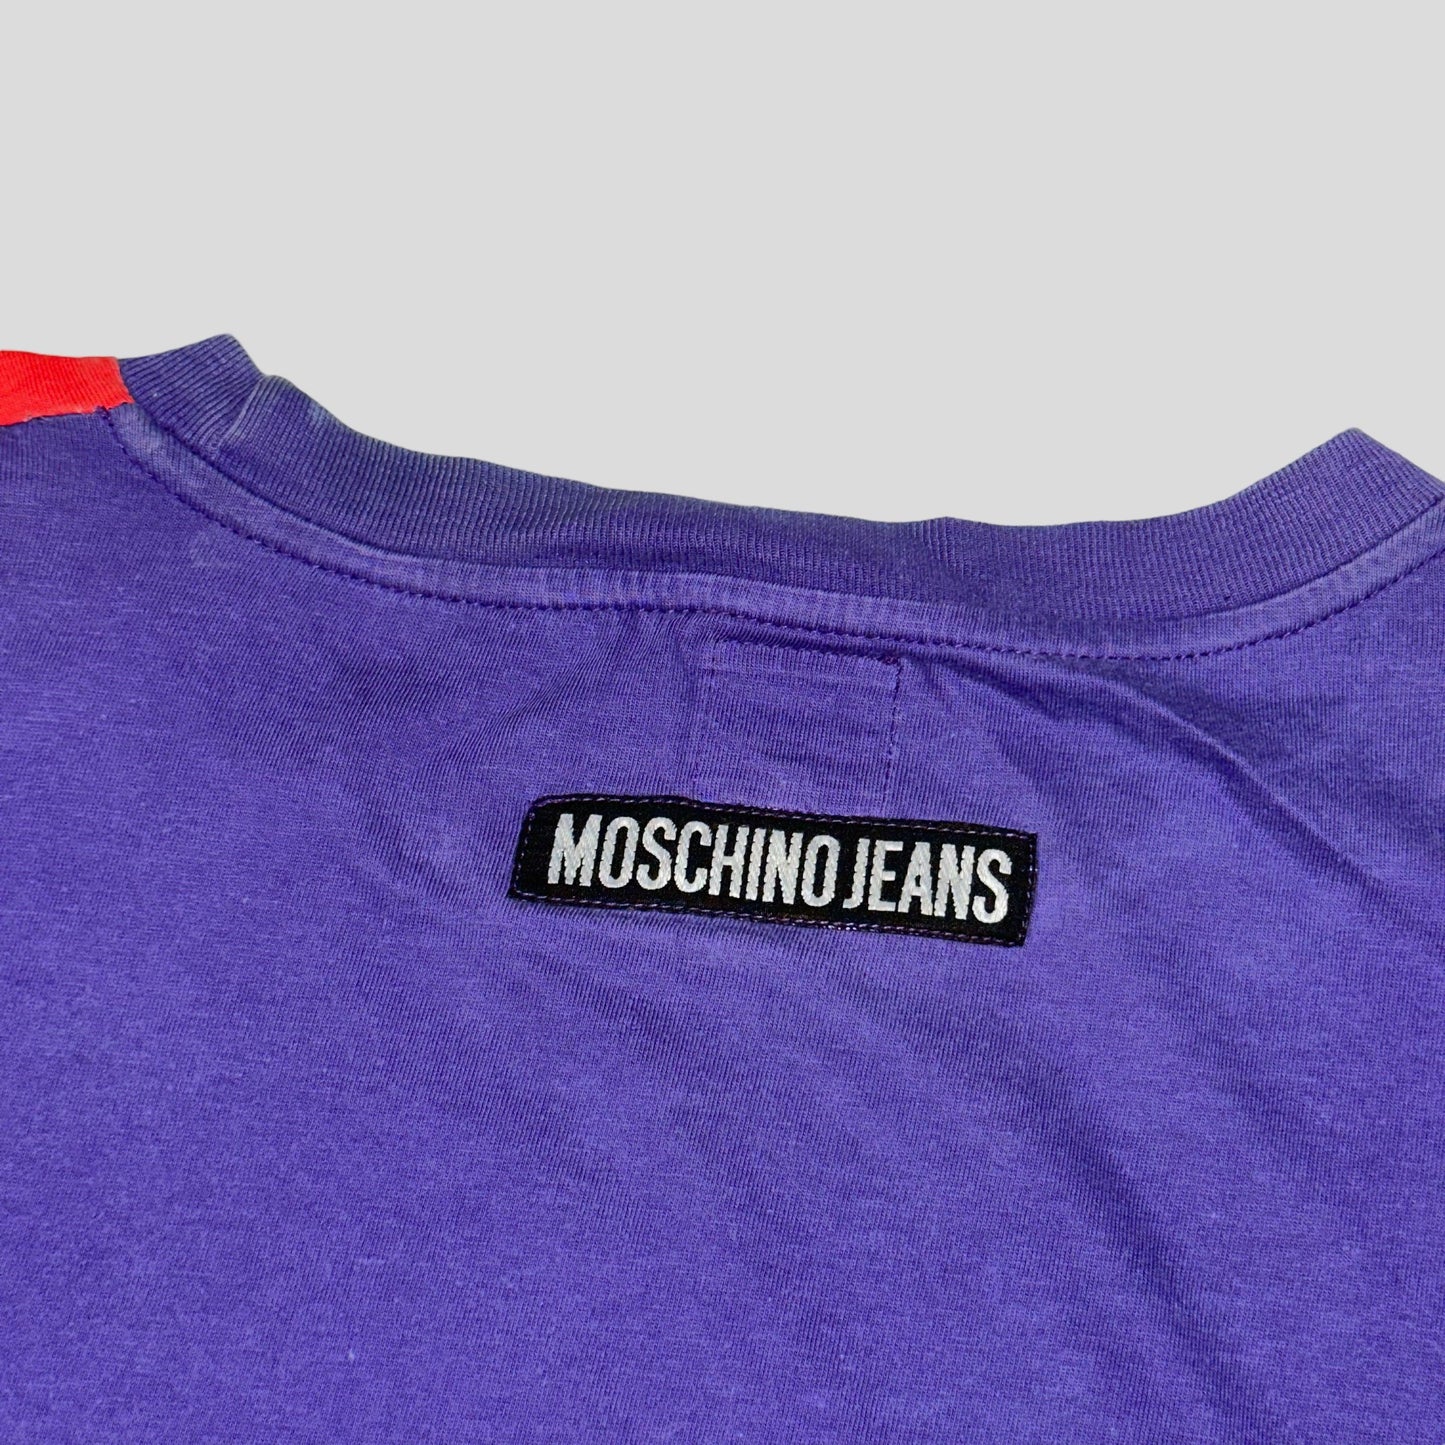 Moschino Jeans 80’s Abstract T-shirt - XL - Known Source